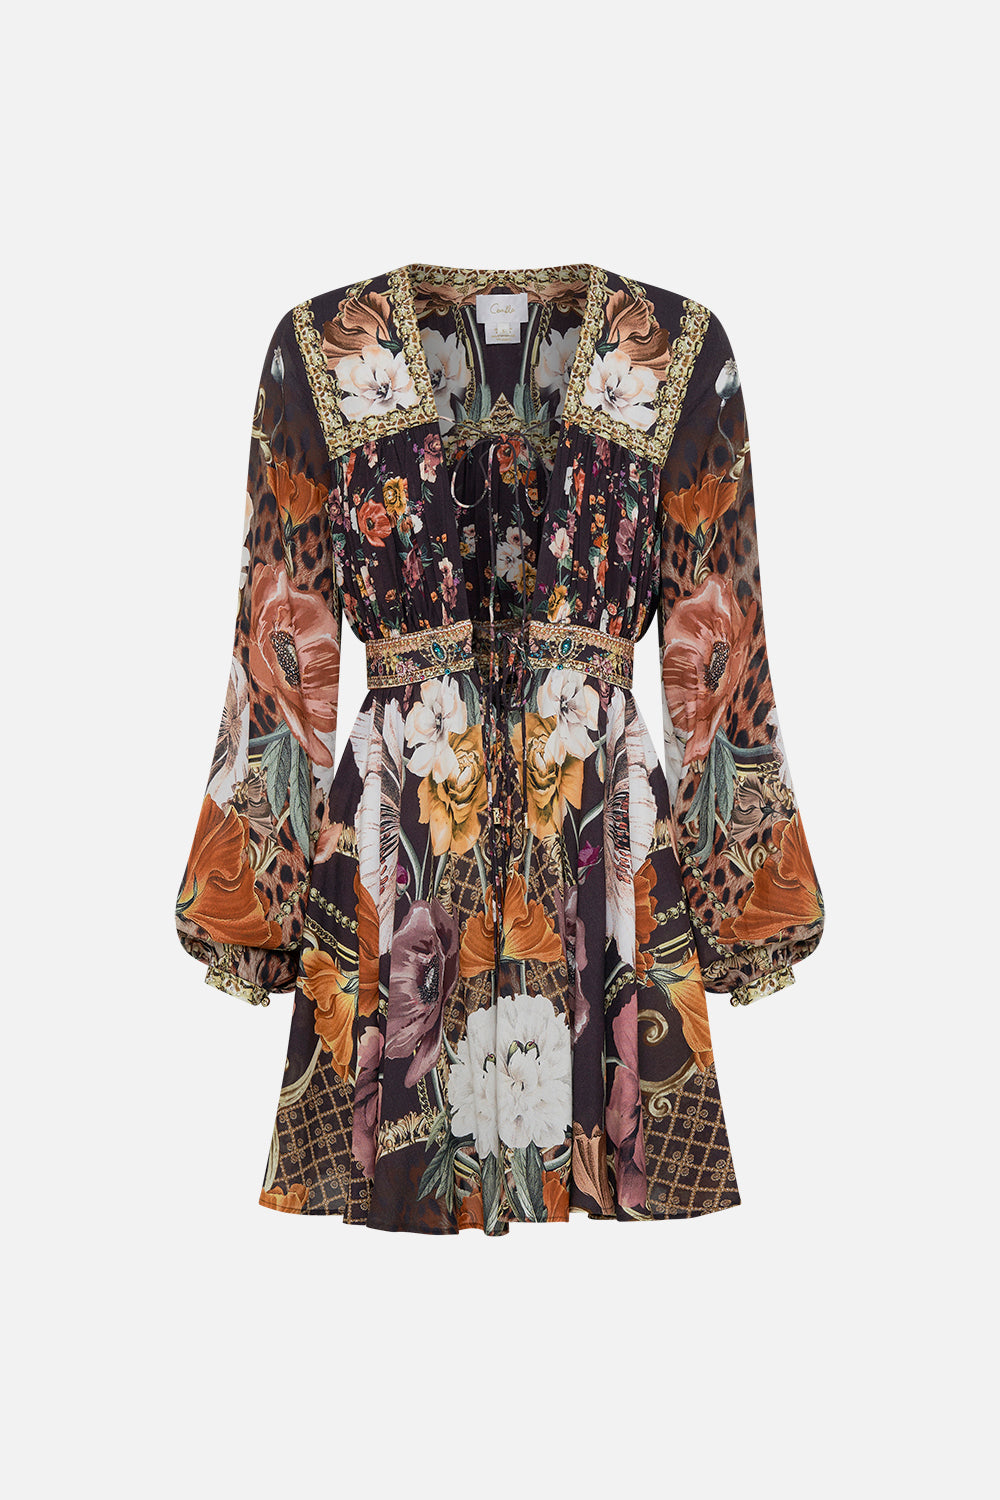 Product view of CAMILLA brown floral mini dress in Wave Your Wand print